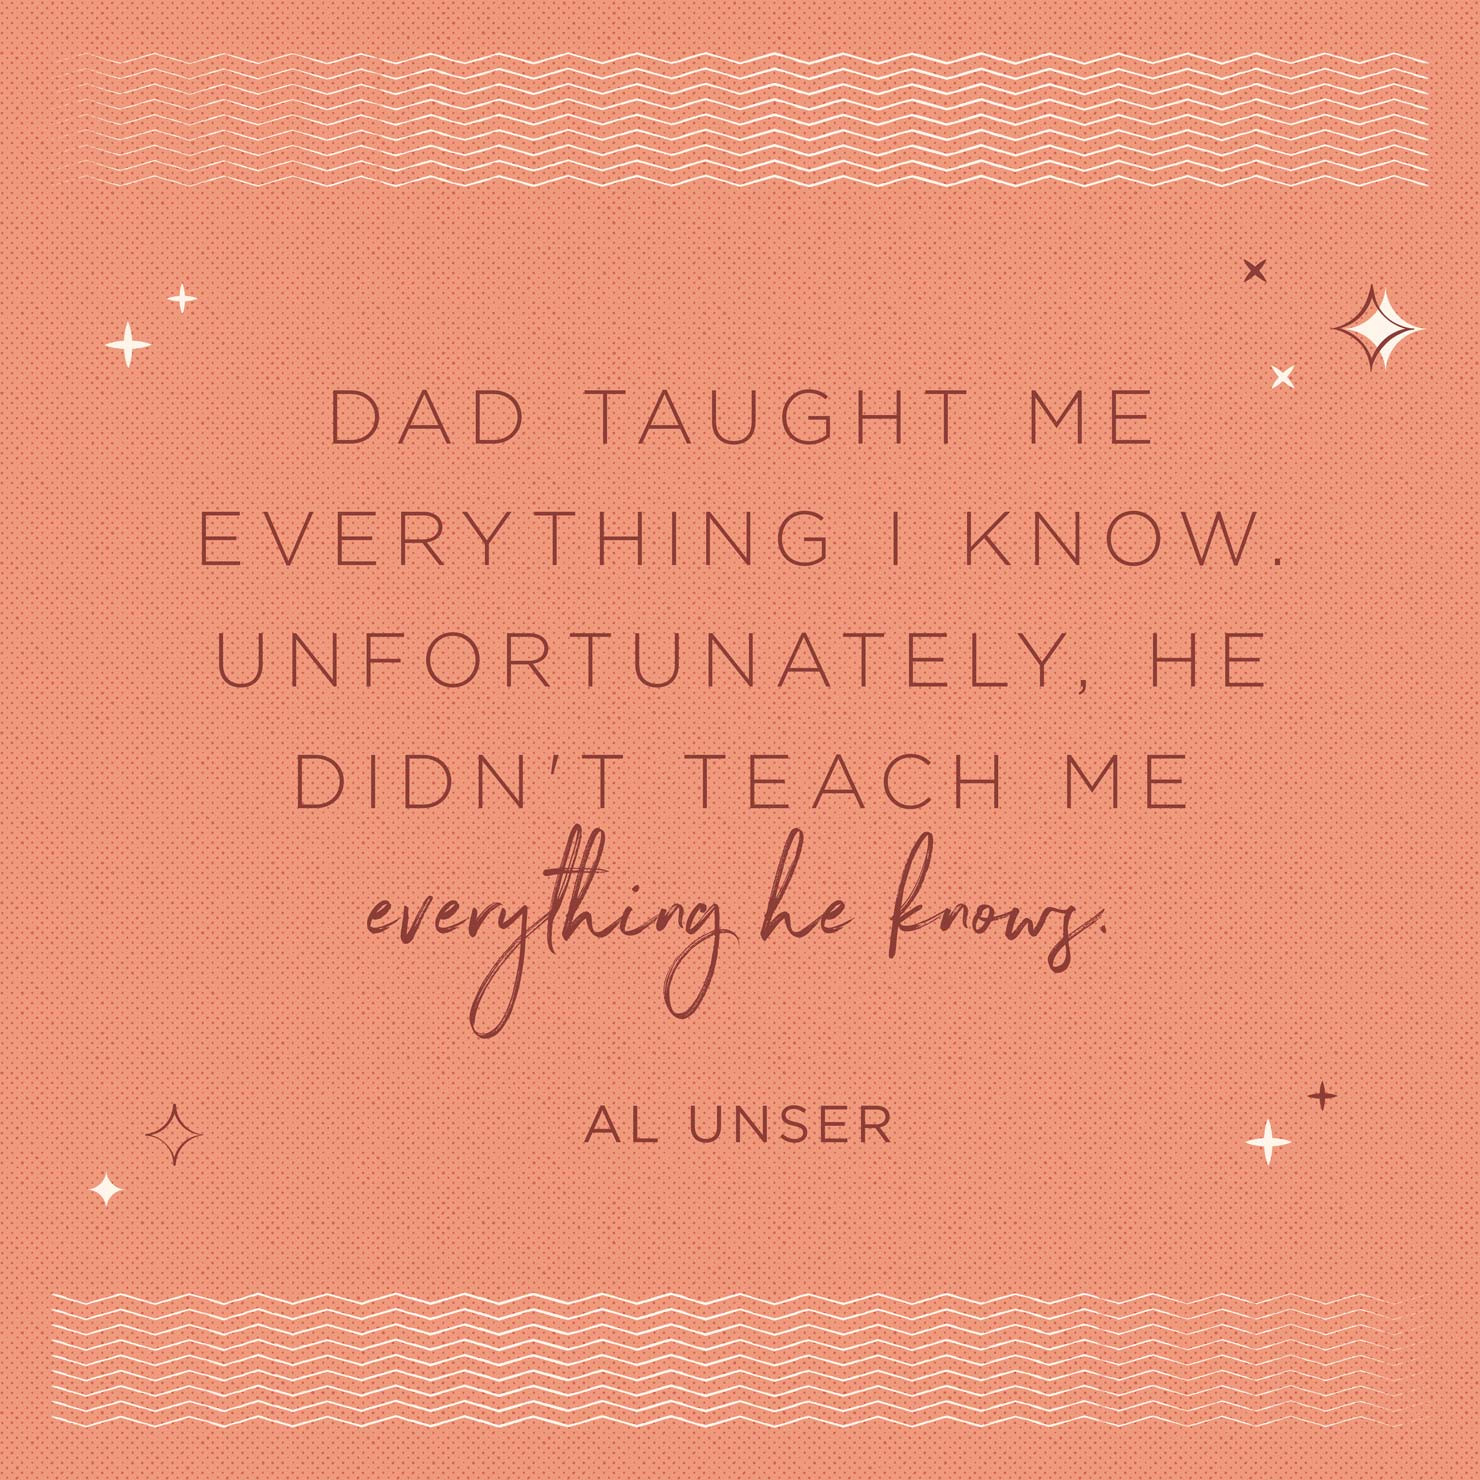 Fathers Day Pictures And Quotes
 100 Happy Father’s Day Quotes [2019]